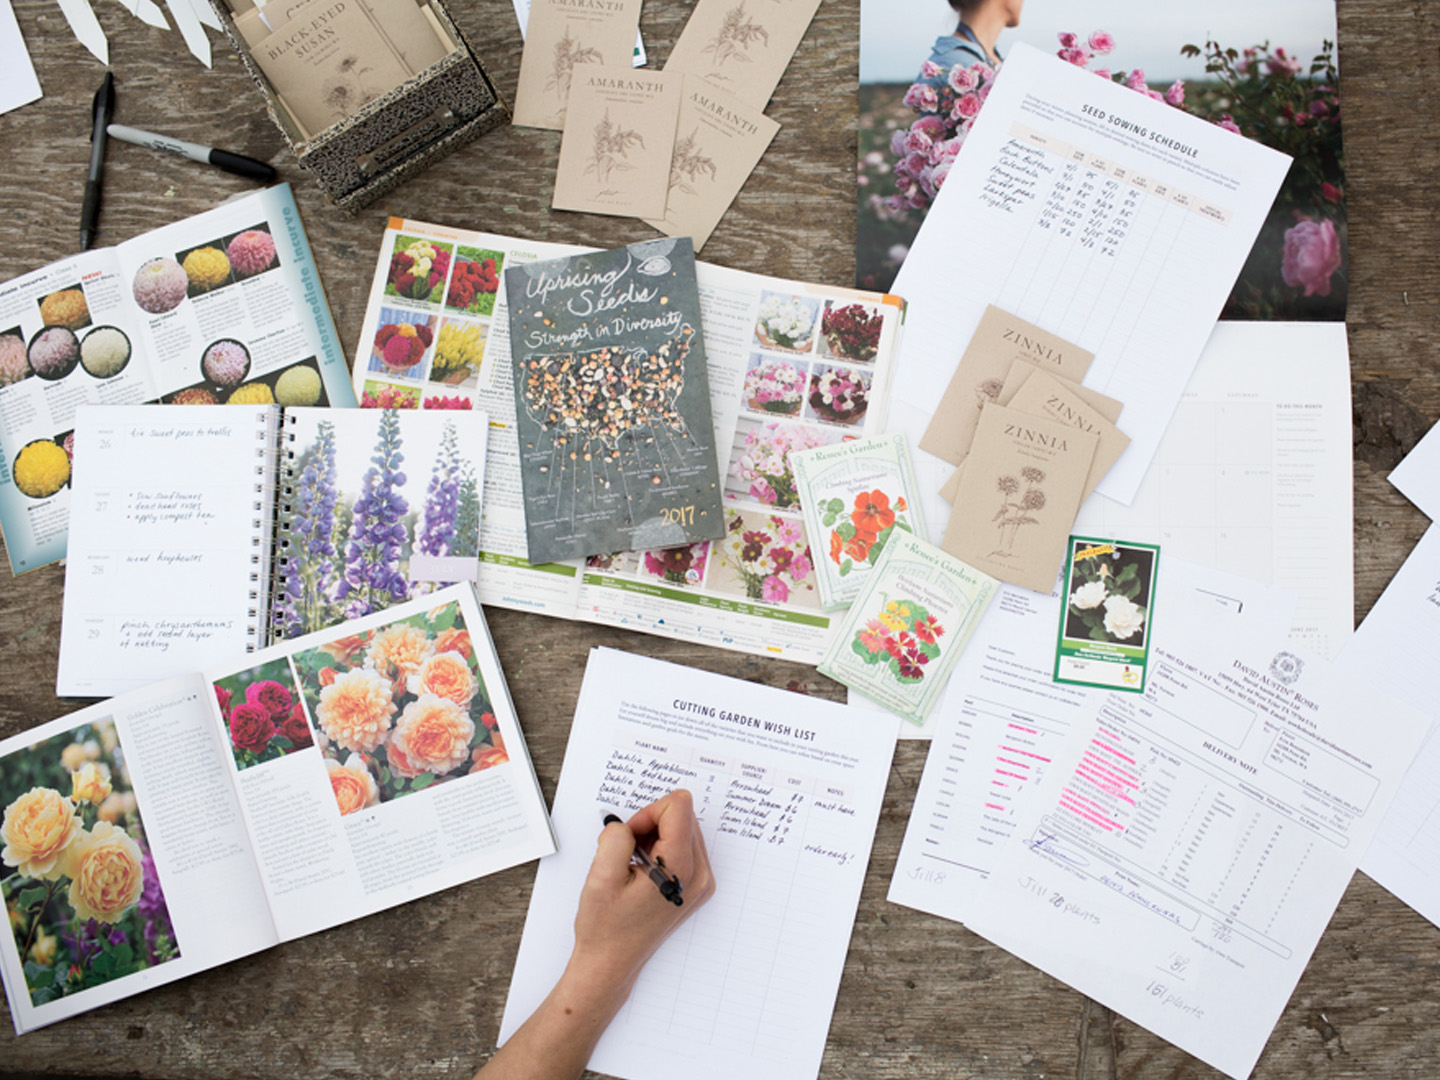 Seeds and garden planning materials laid out on a table